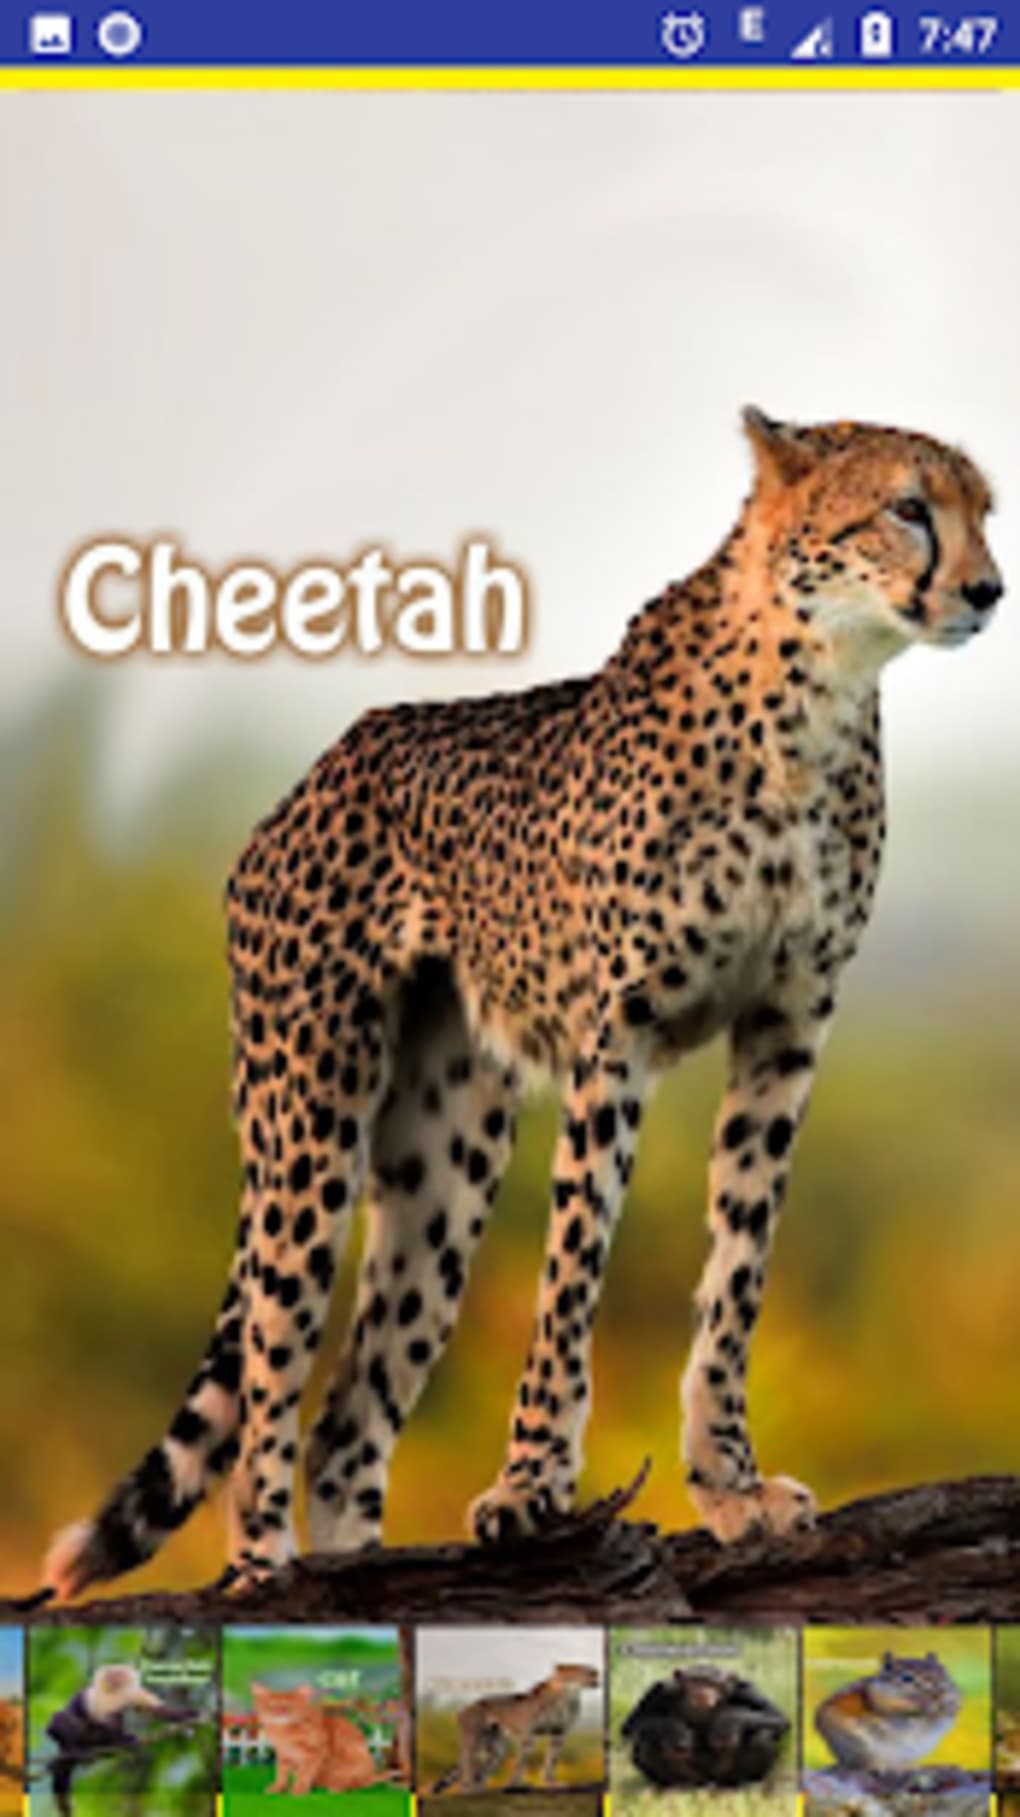 Animal Sounds and Ringtones APK for Android - Download